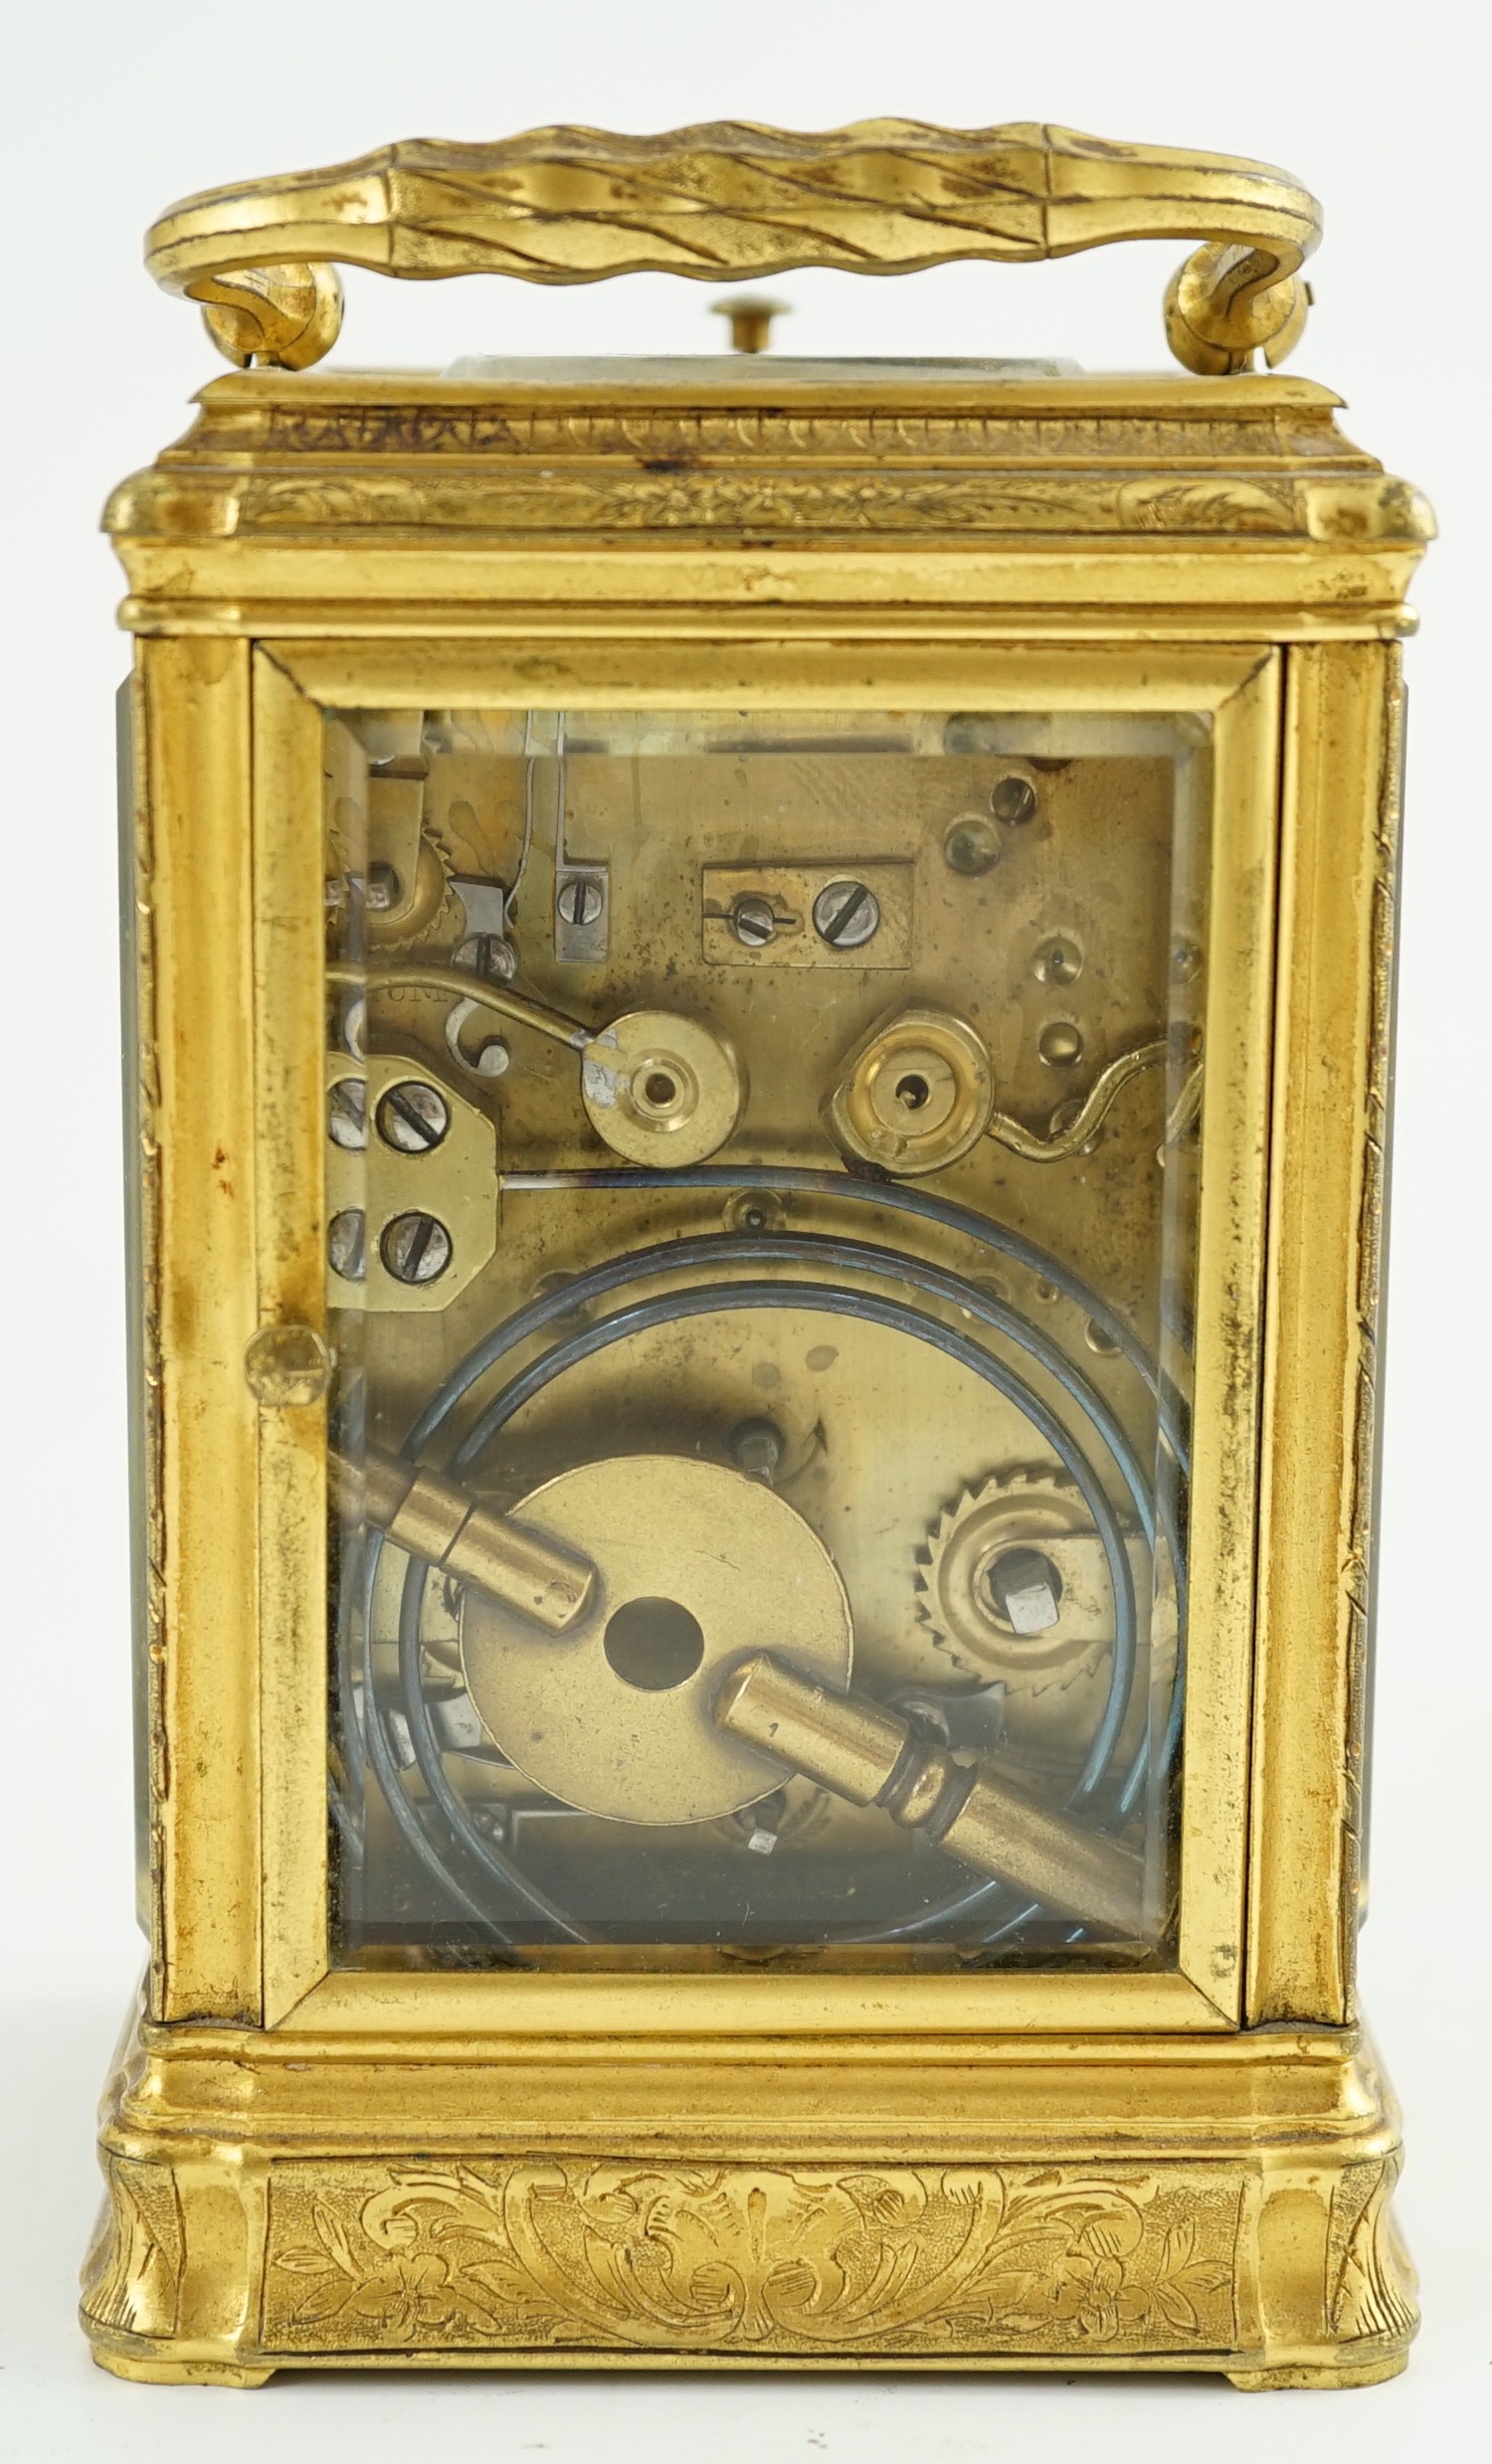 A late 19th century French engraved gilt brass gorge-cased repeating carriage clock with alarm, width 7.5cm depth 6.5cm height 11.5cm